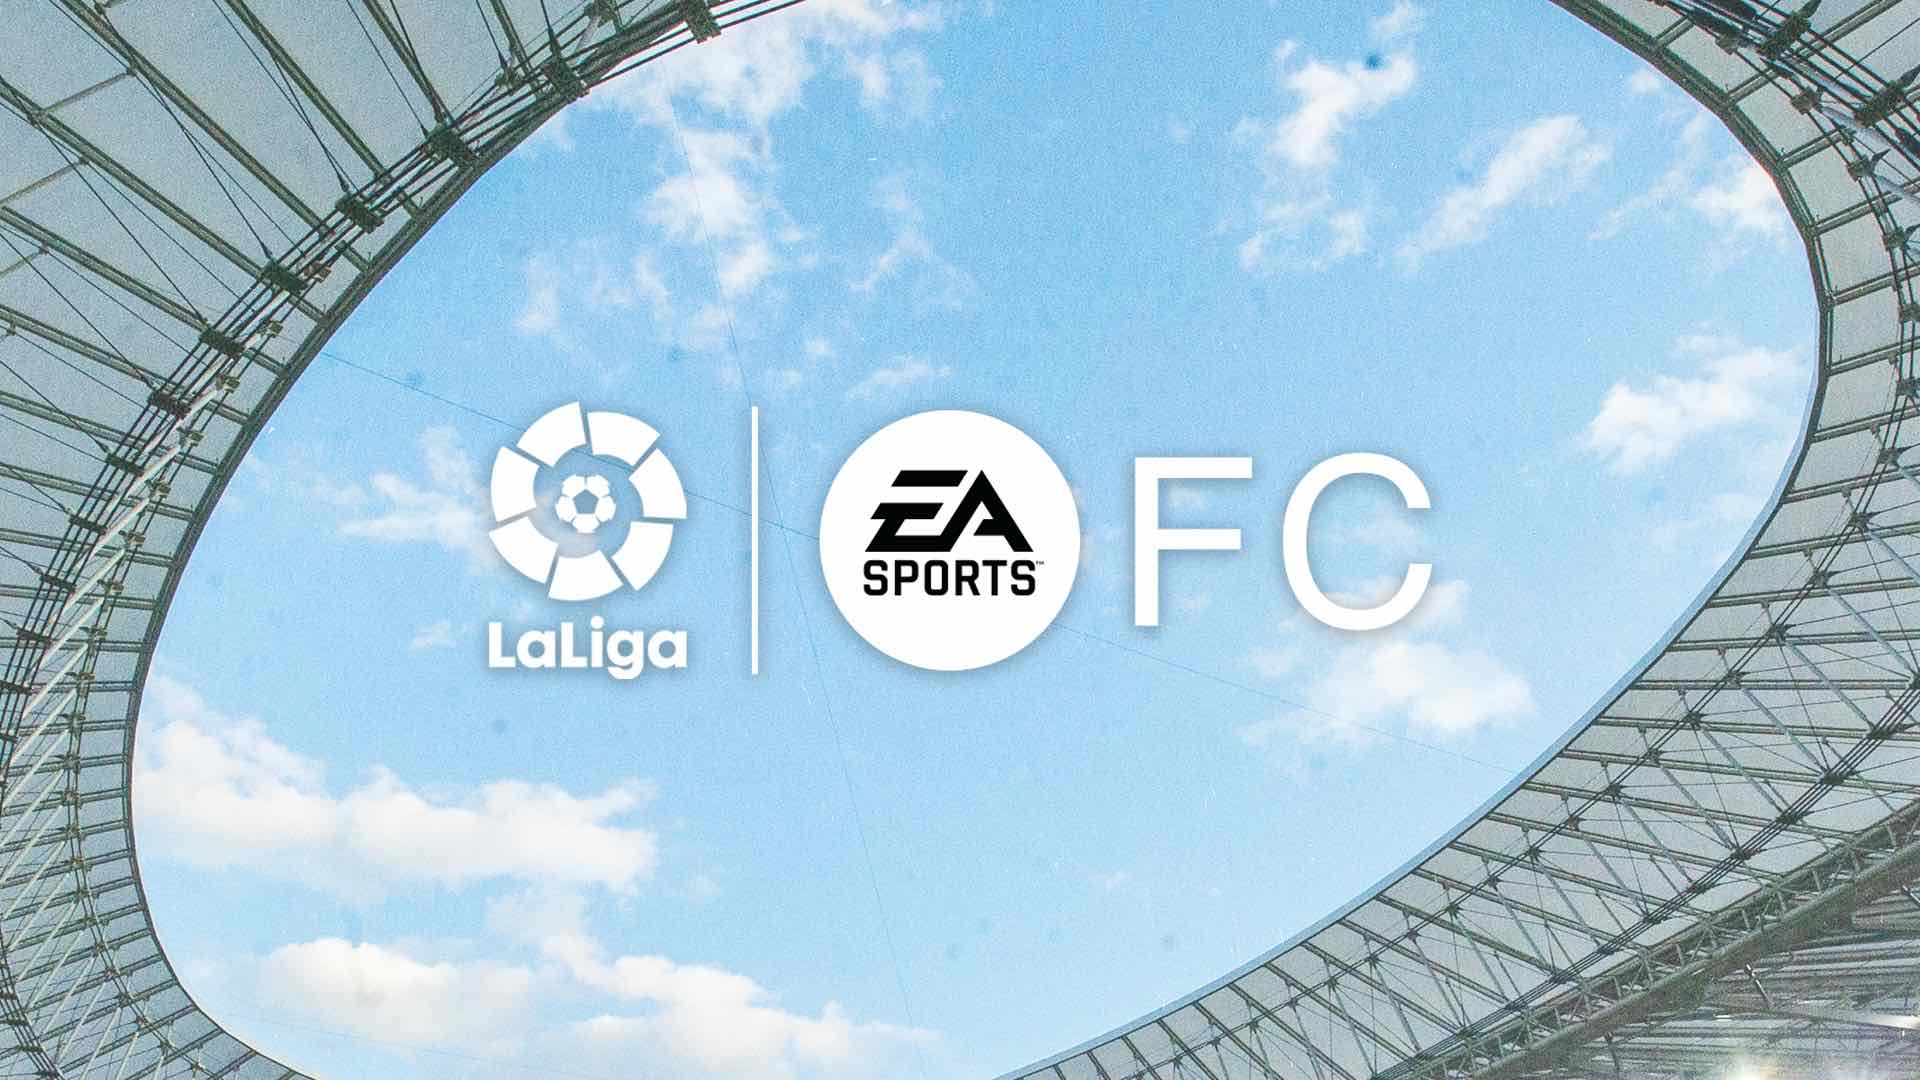 Spanish league to be sponsored by EA Sports in 2023